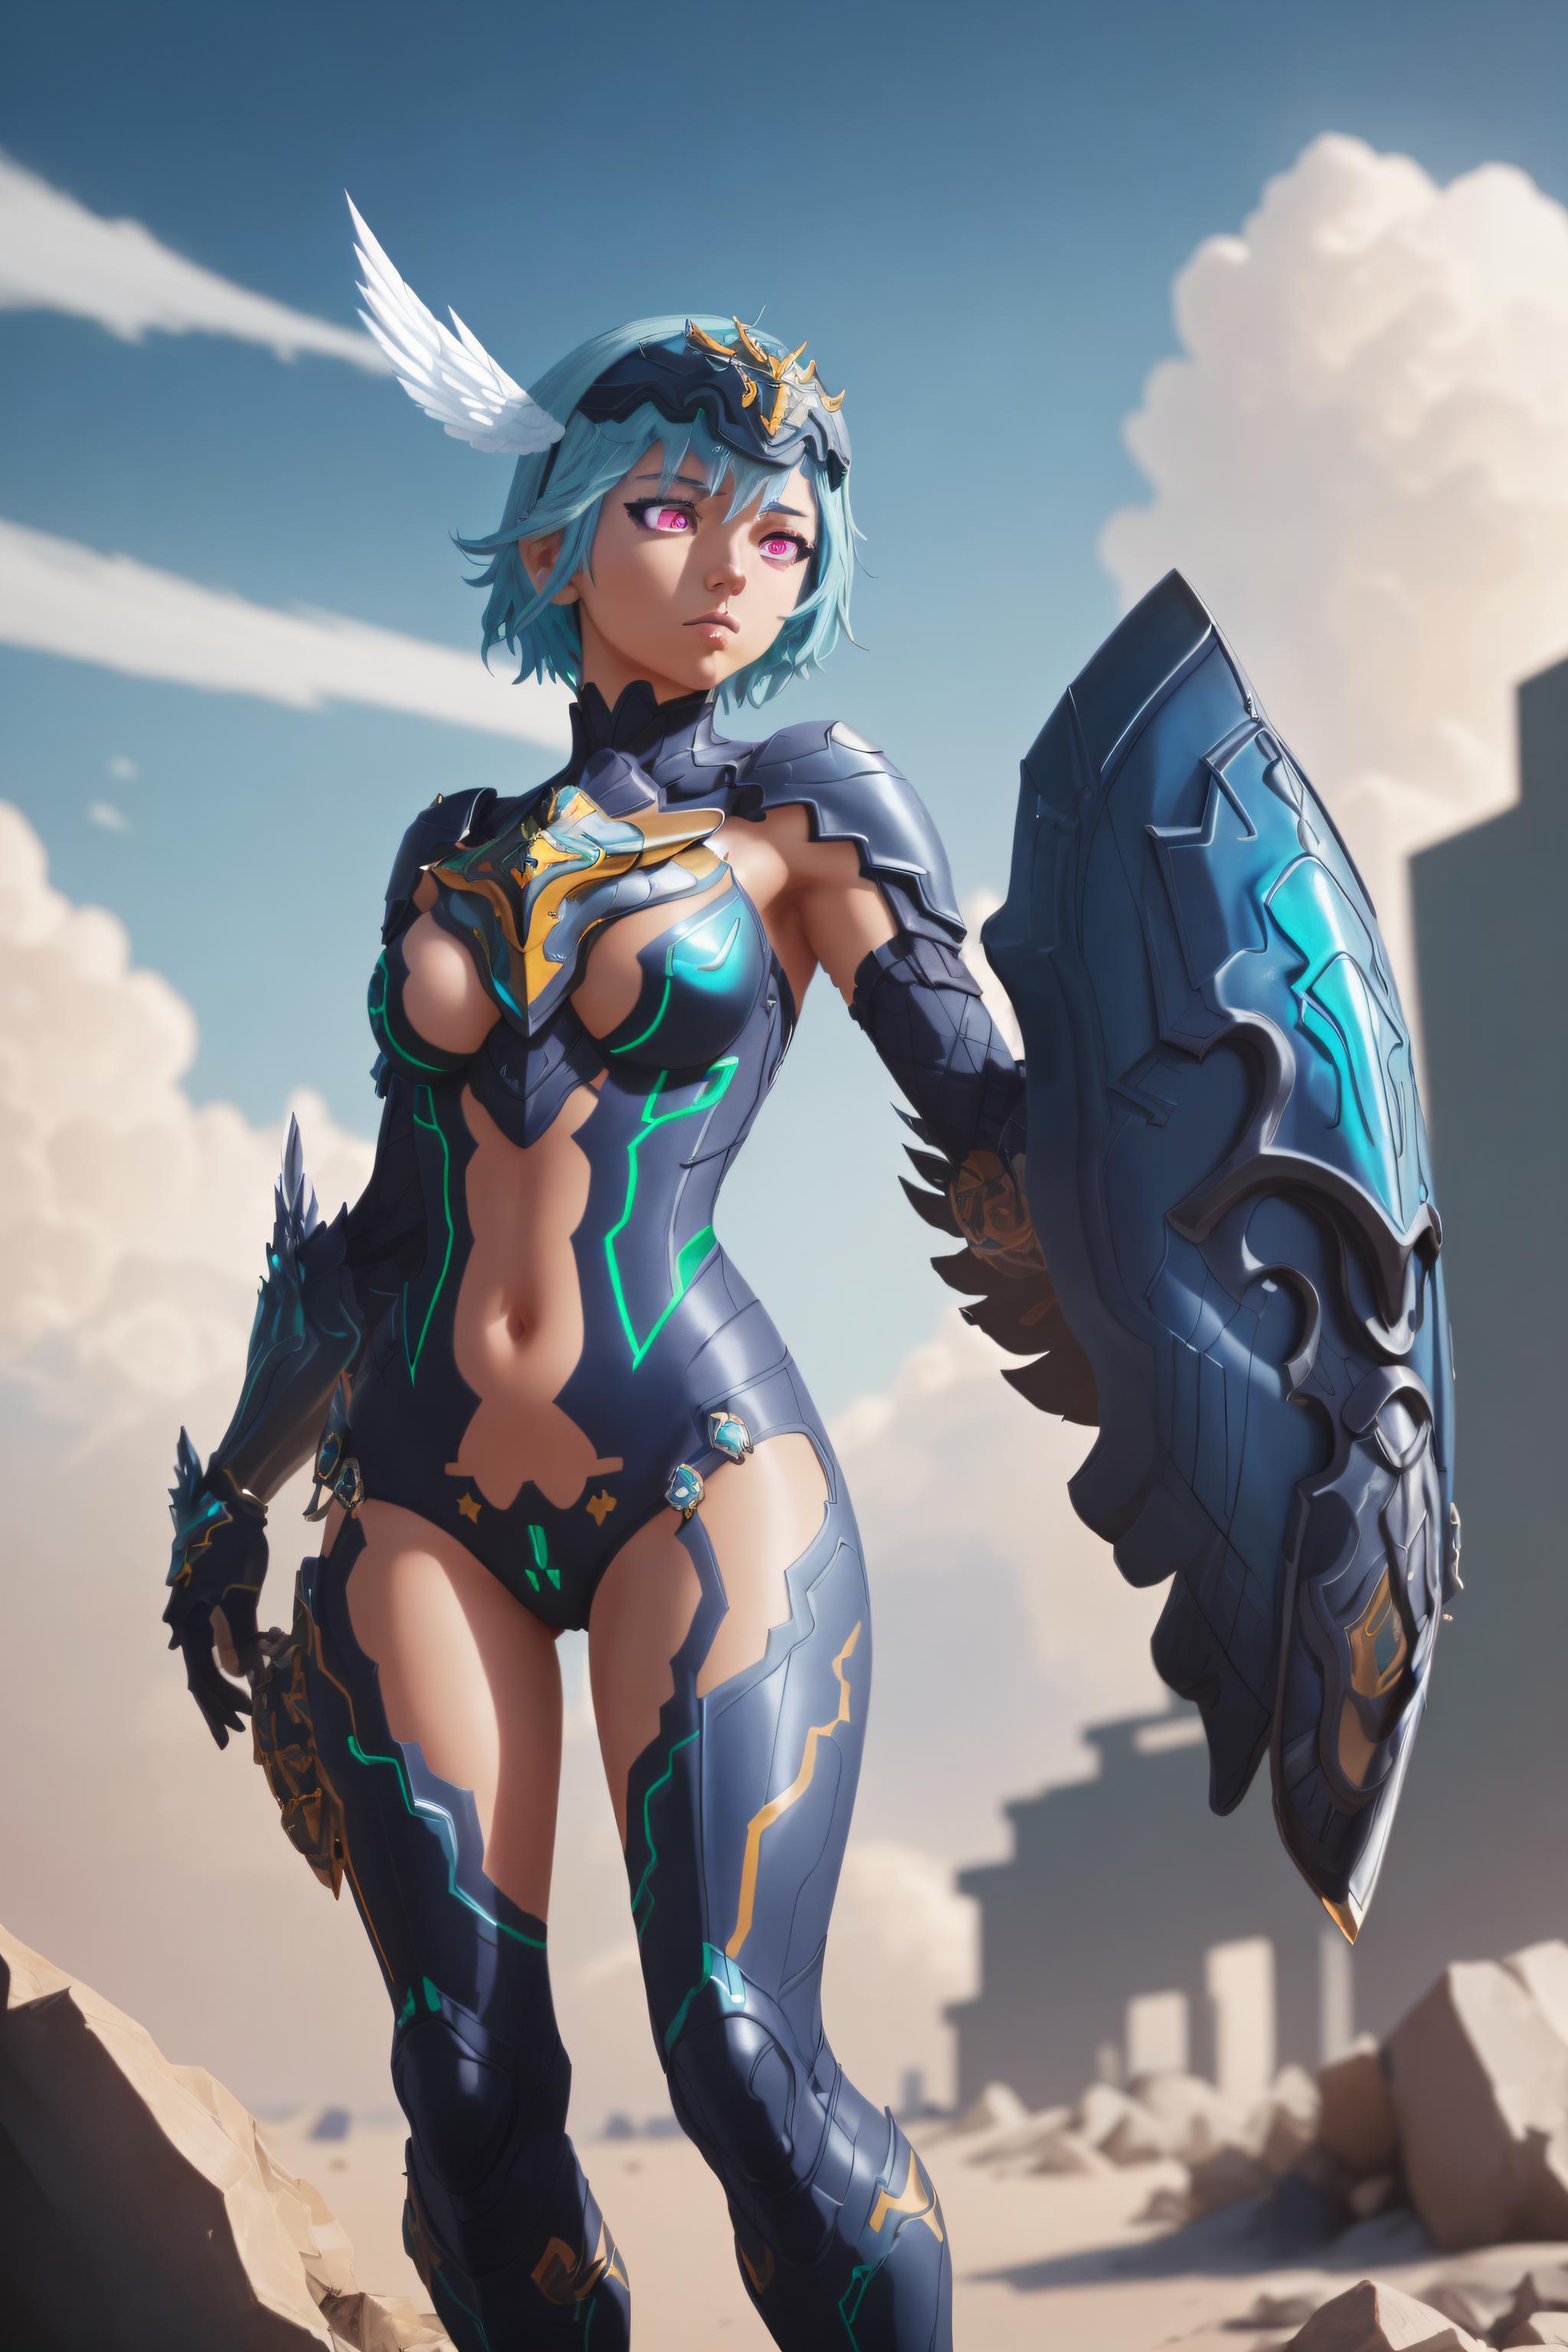 AI model image by Xypher